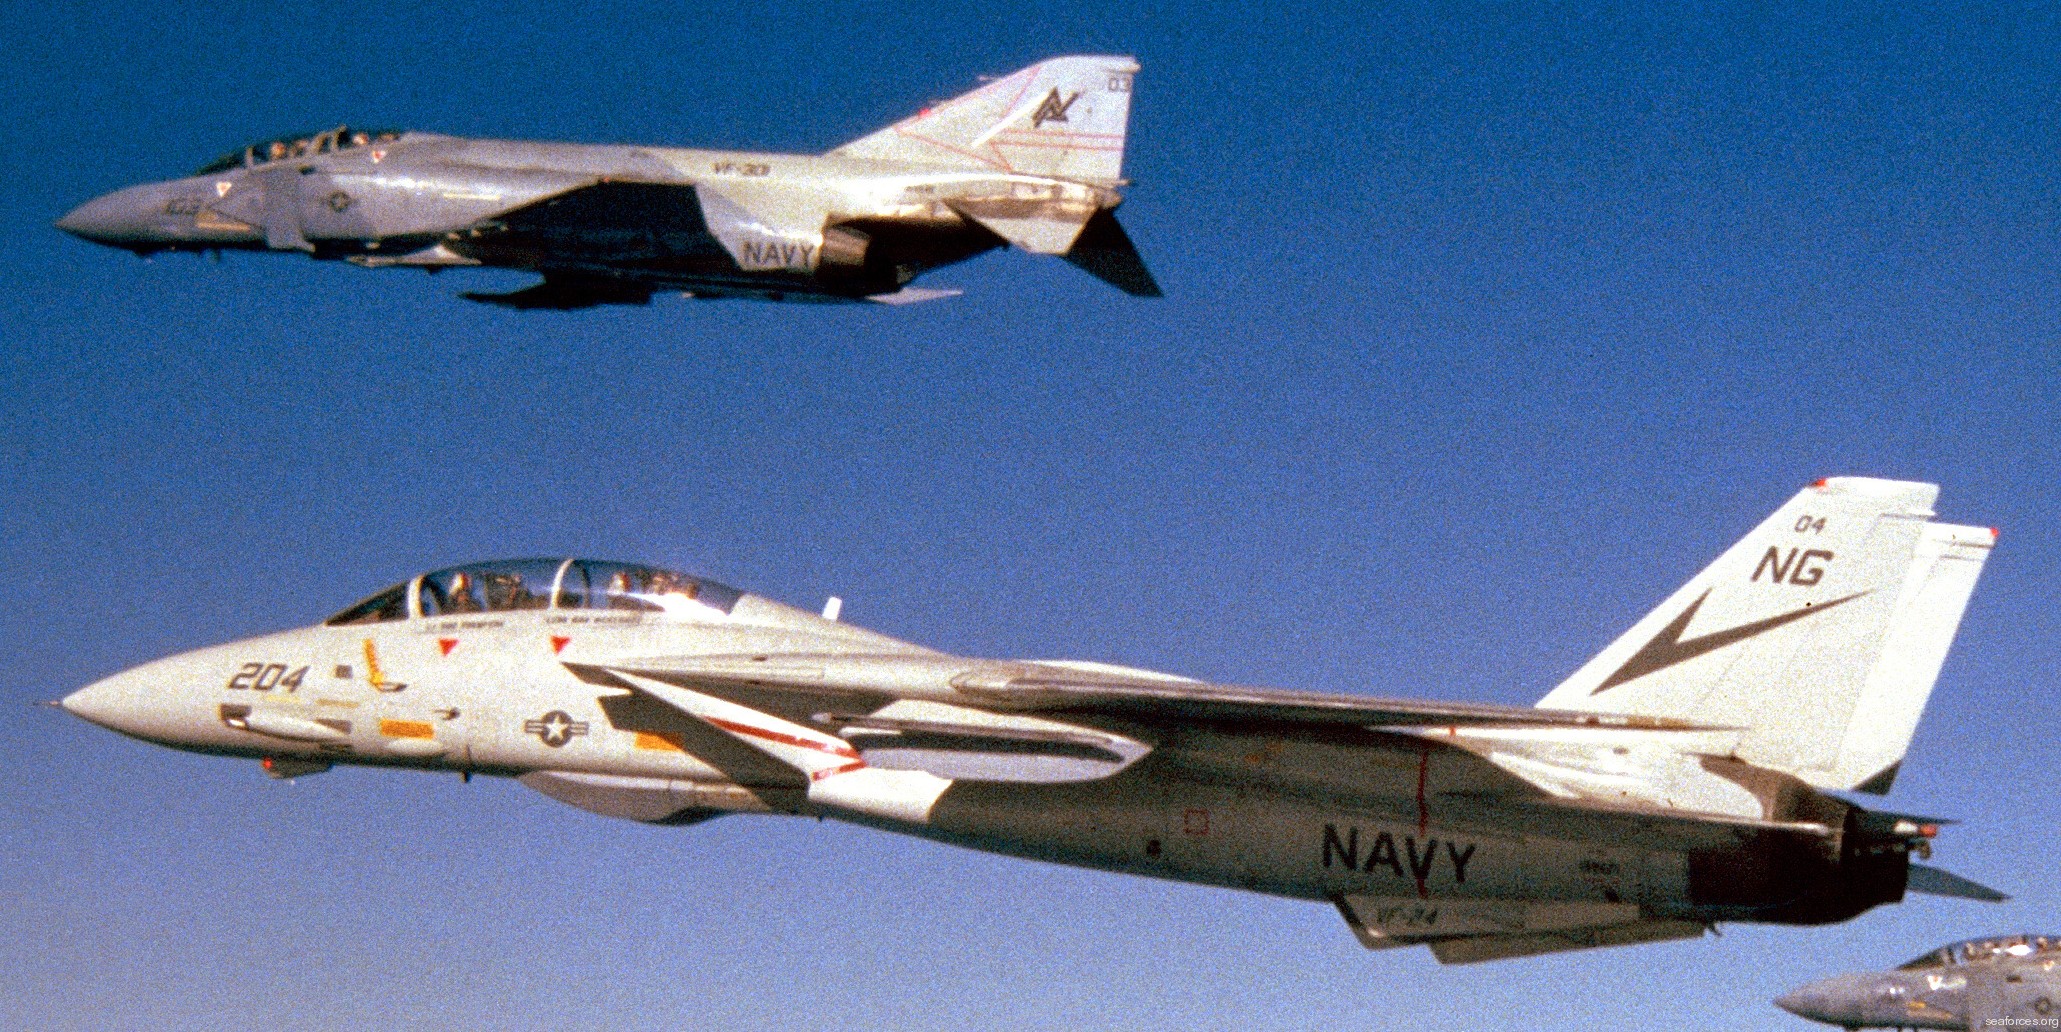 vf-24 fighting renegades fighter squadron navy f-14a tomcat carrier air wing cvw-9 mcas yuma arizona 14